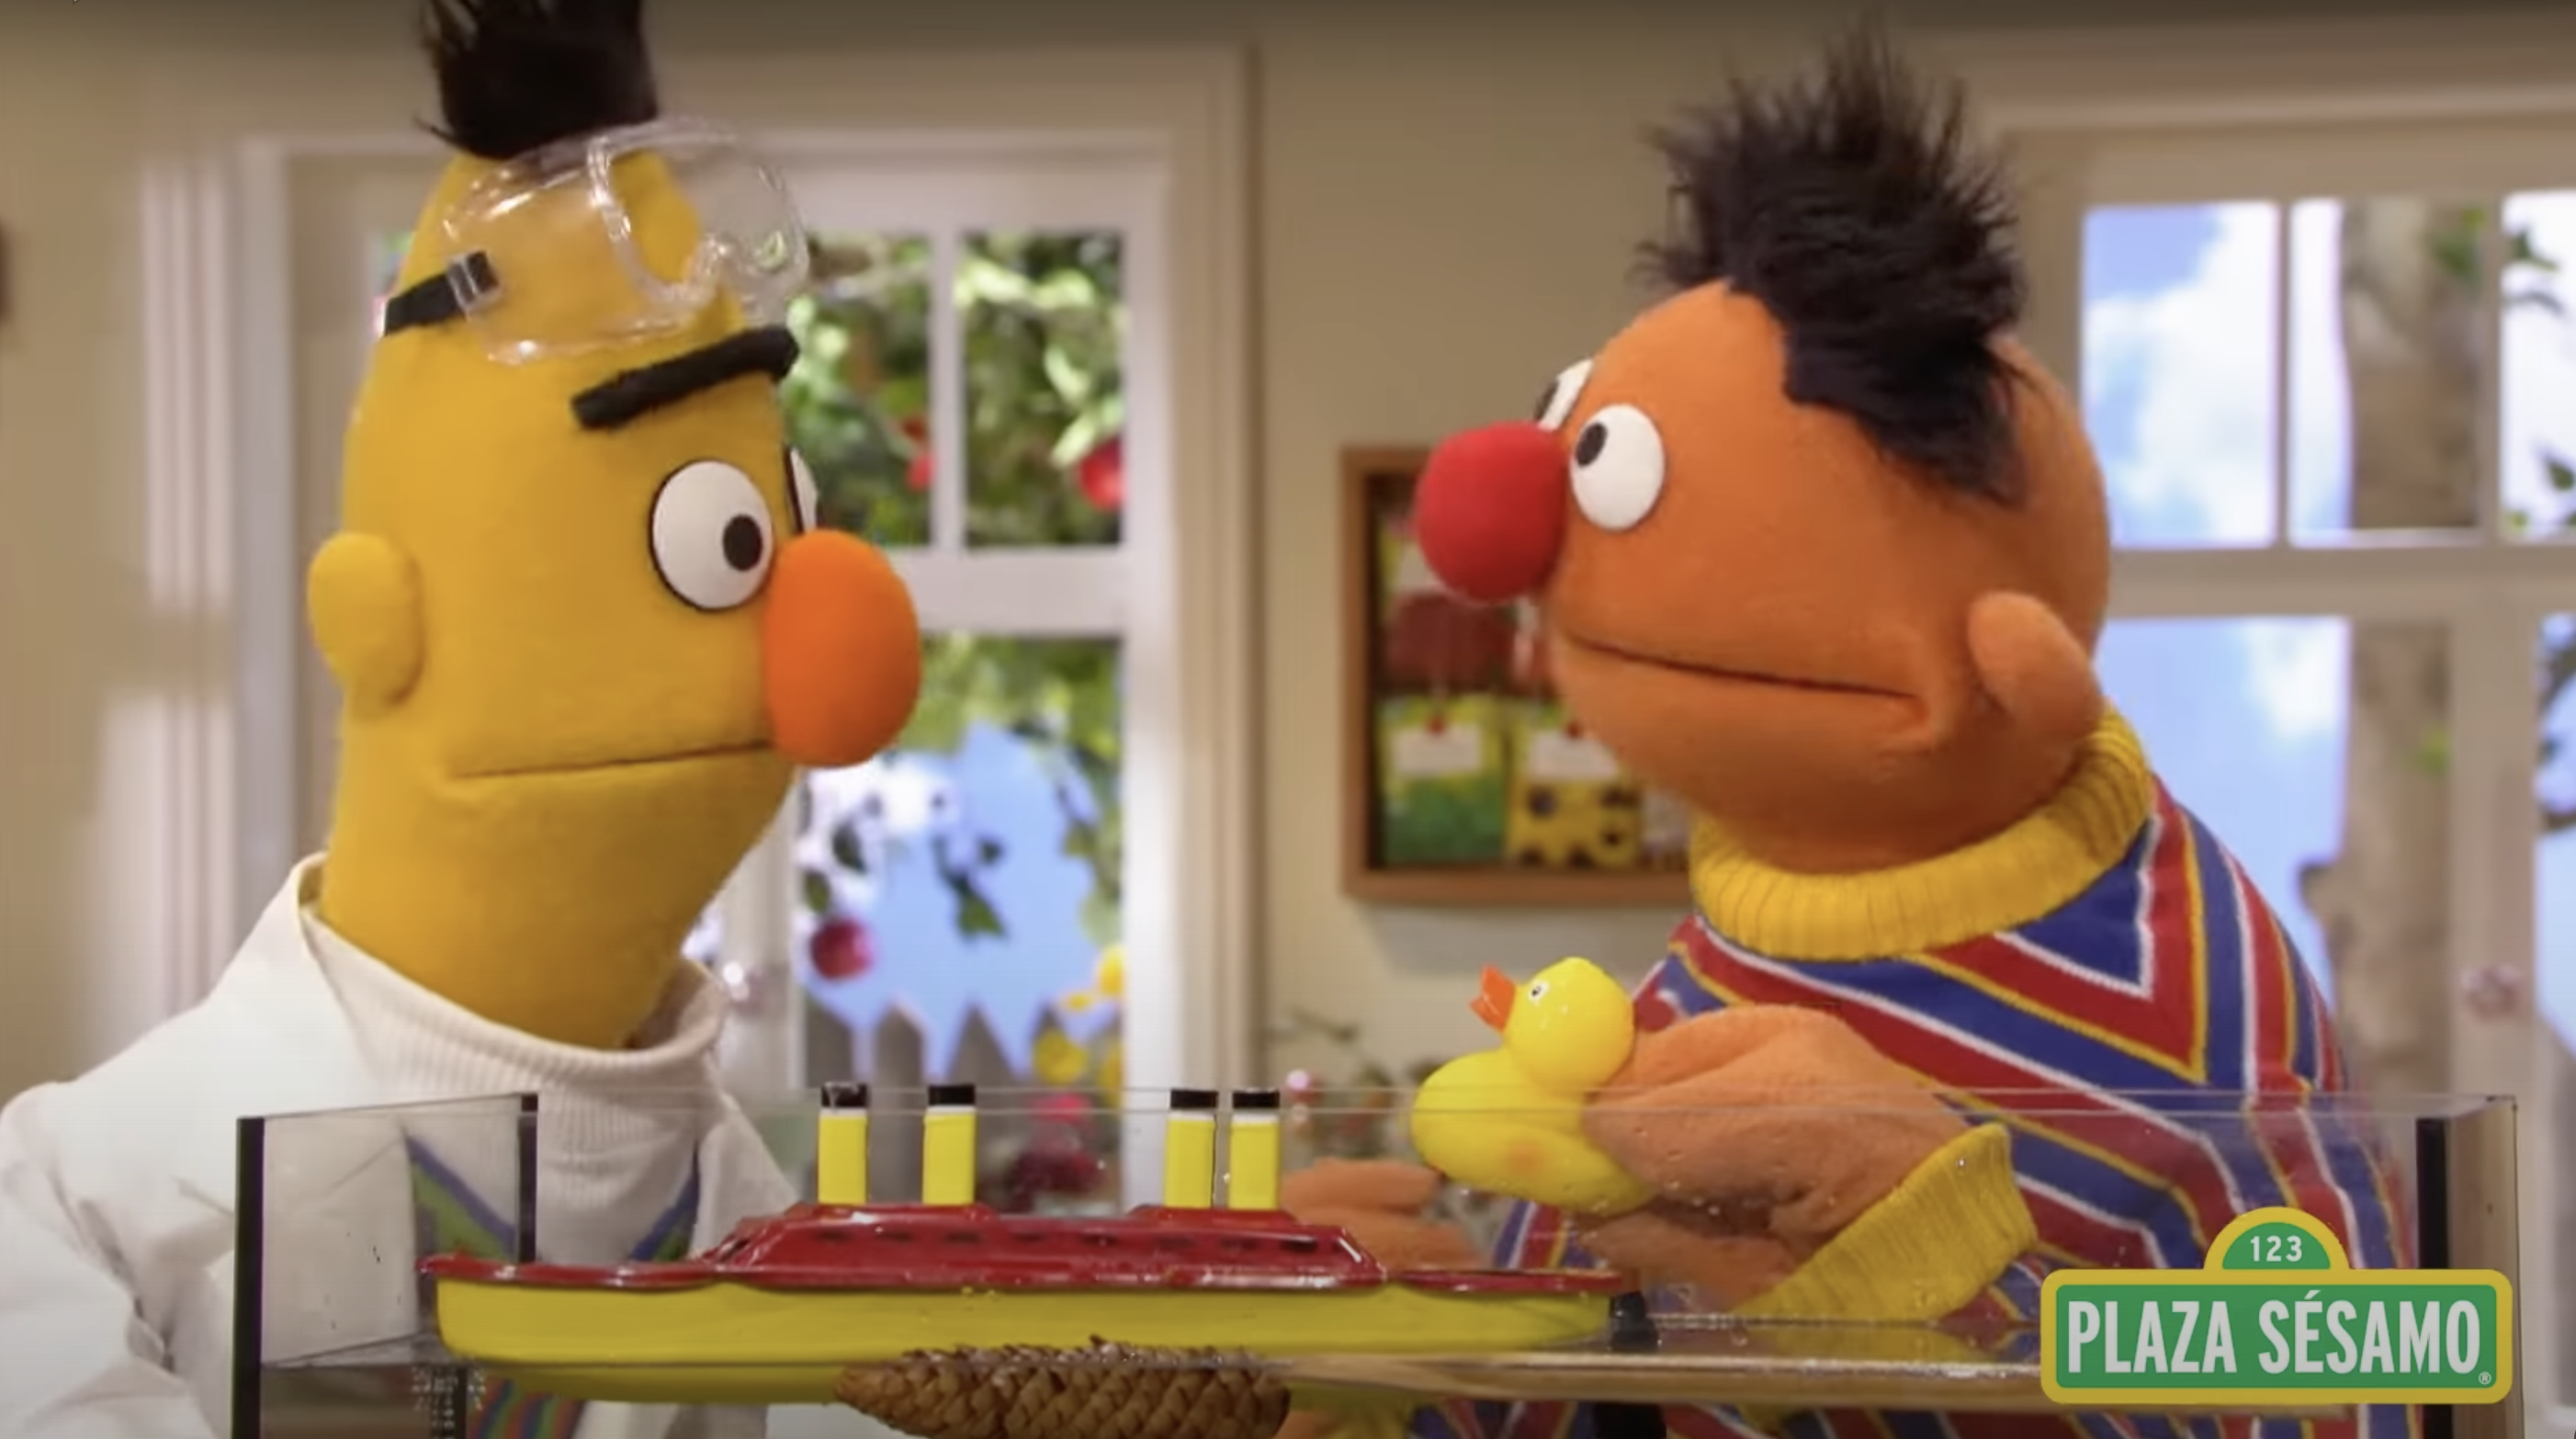 Beto and Enrique from Sesame Street, with Beto wearing a white coat and laboratory glasses. In front of them are a toy boat and a rubber duck